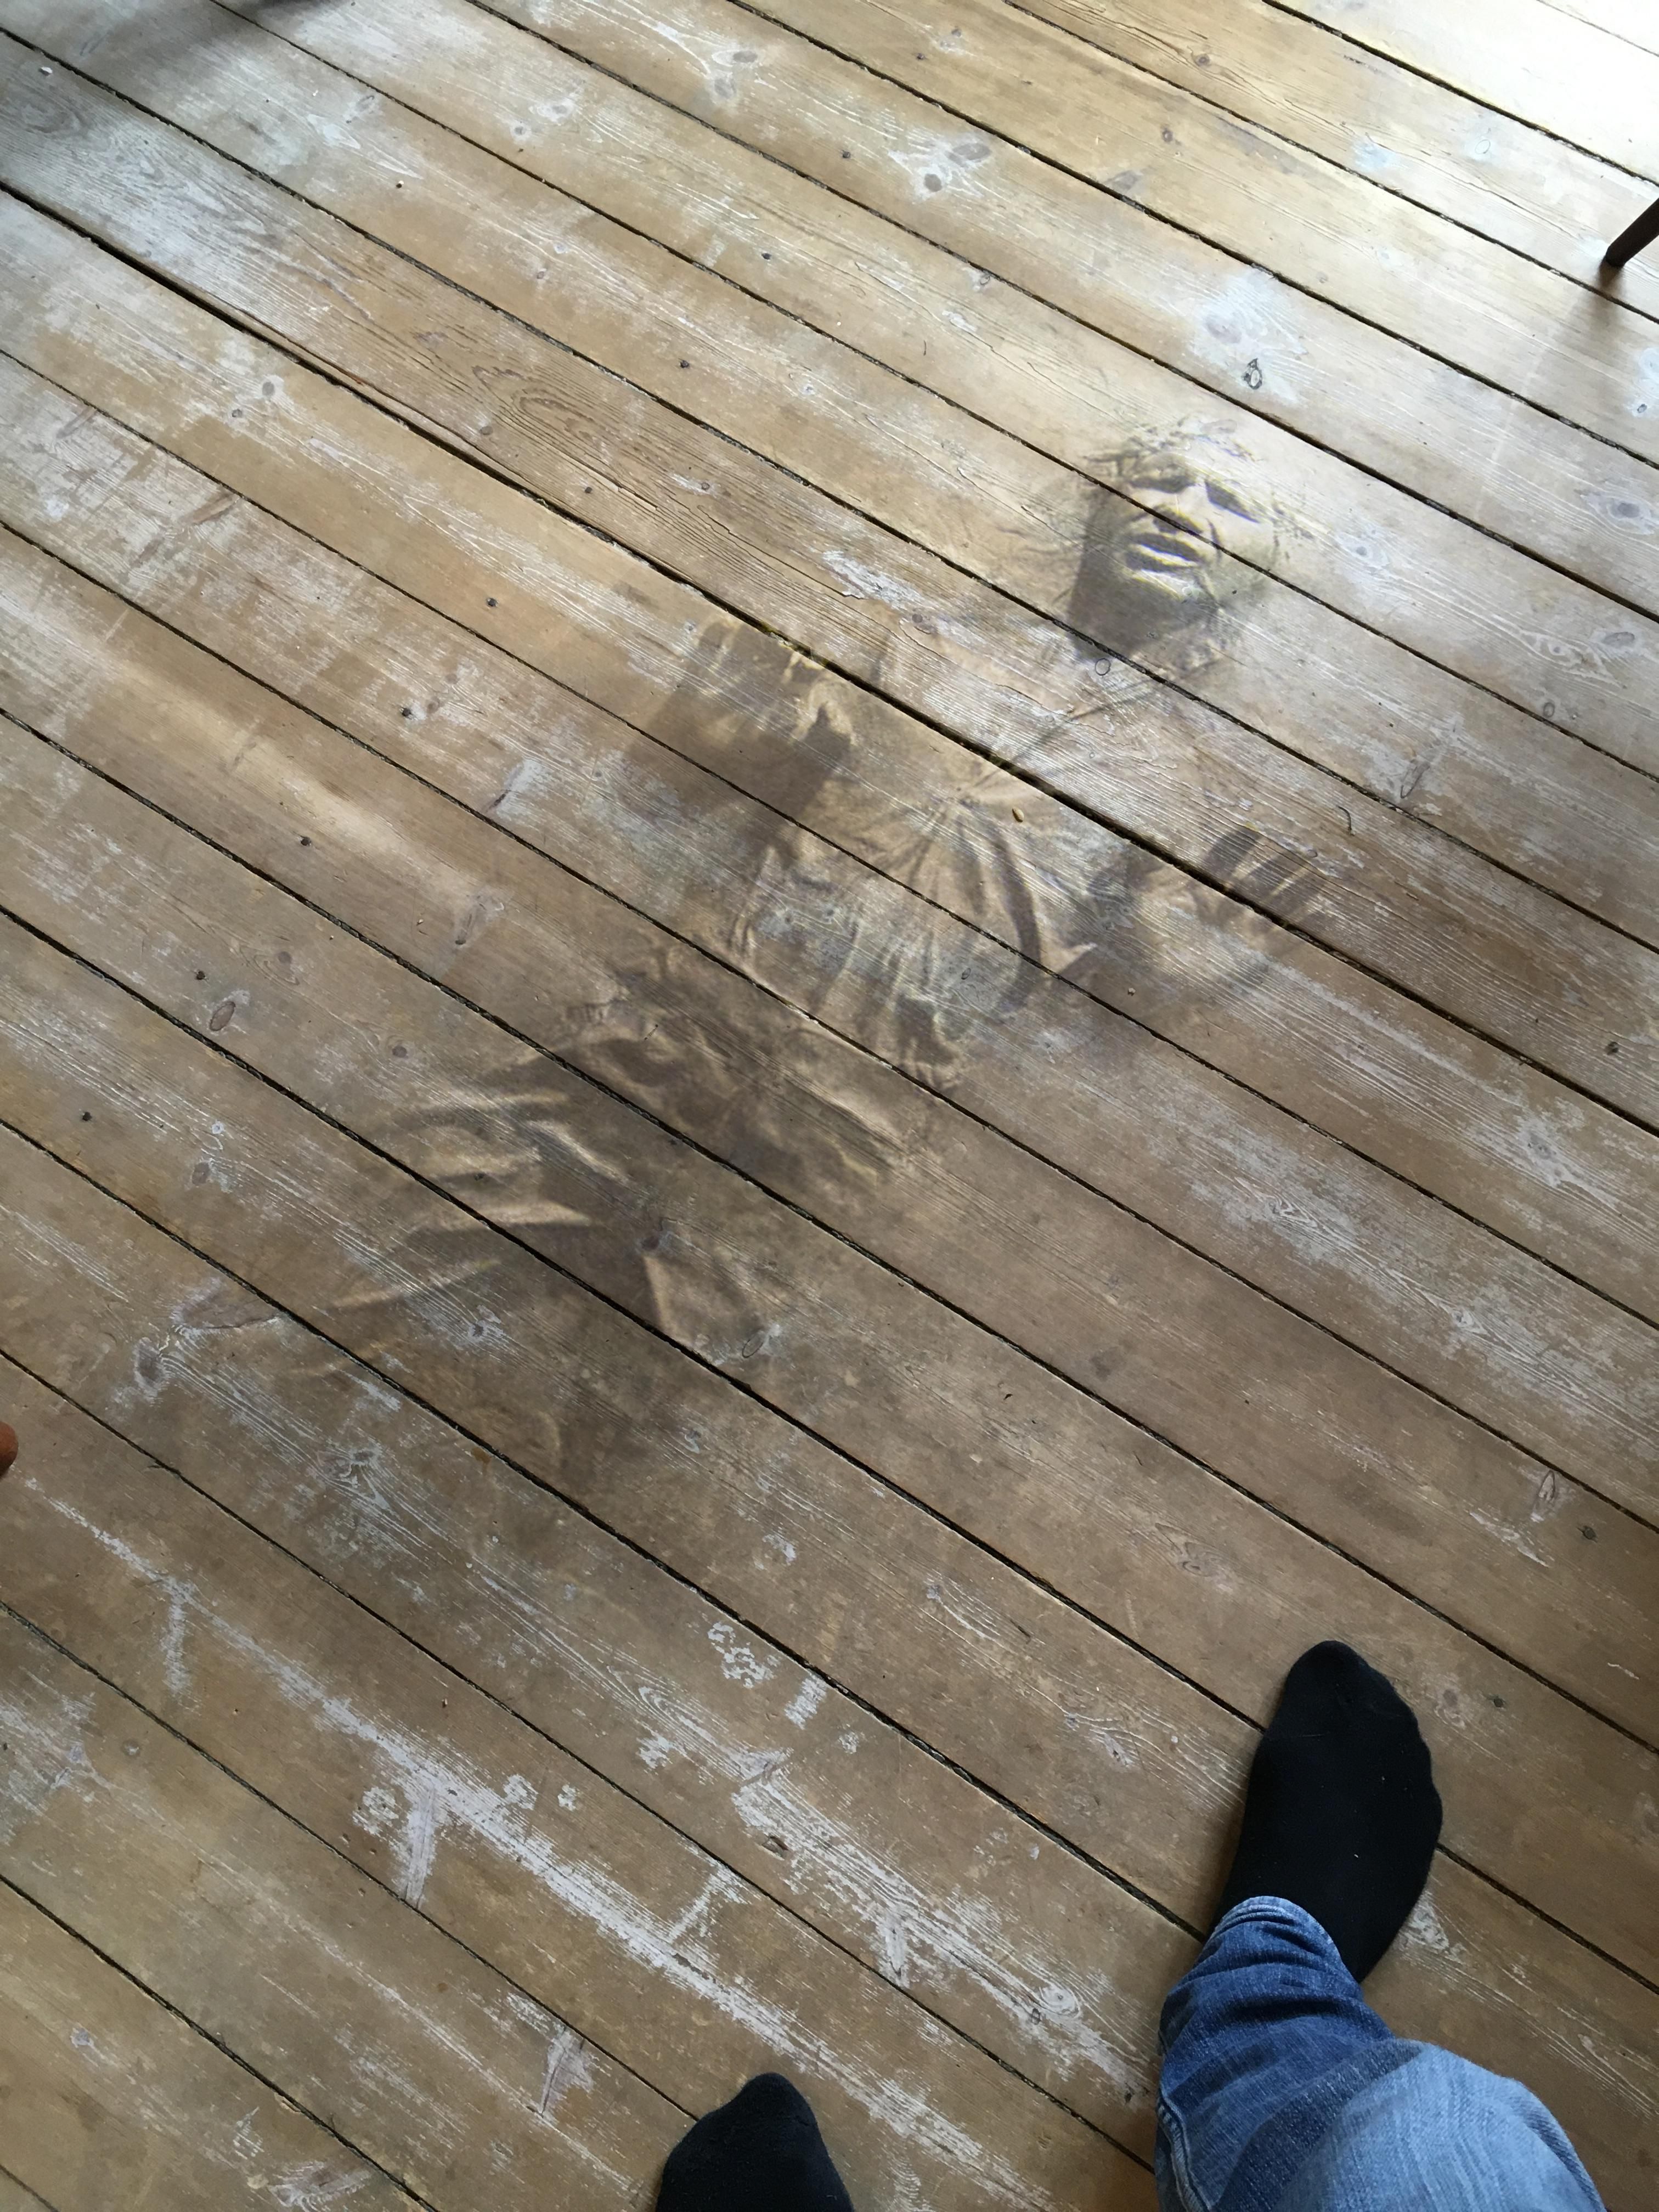 There's a human fossil in my floor planks